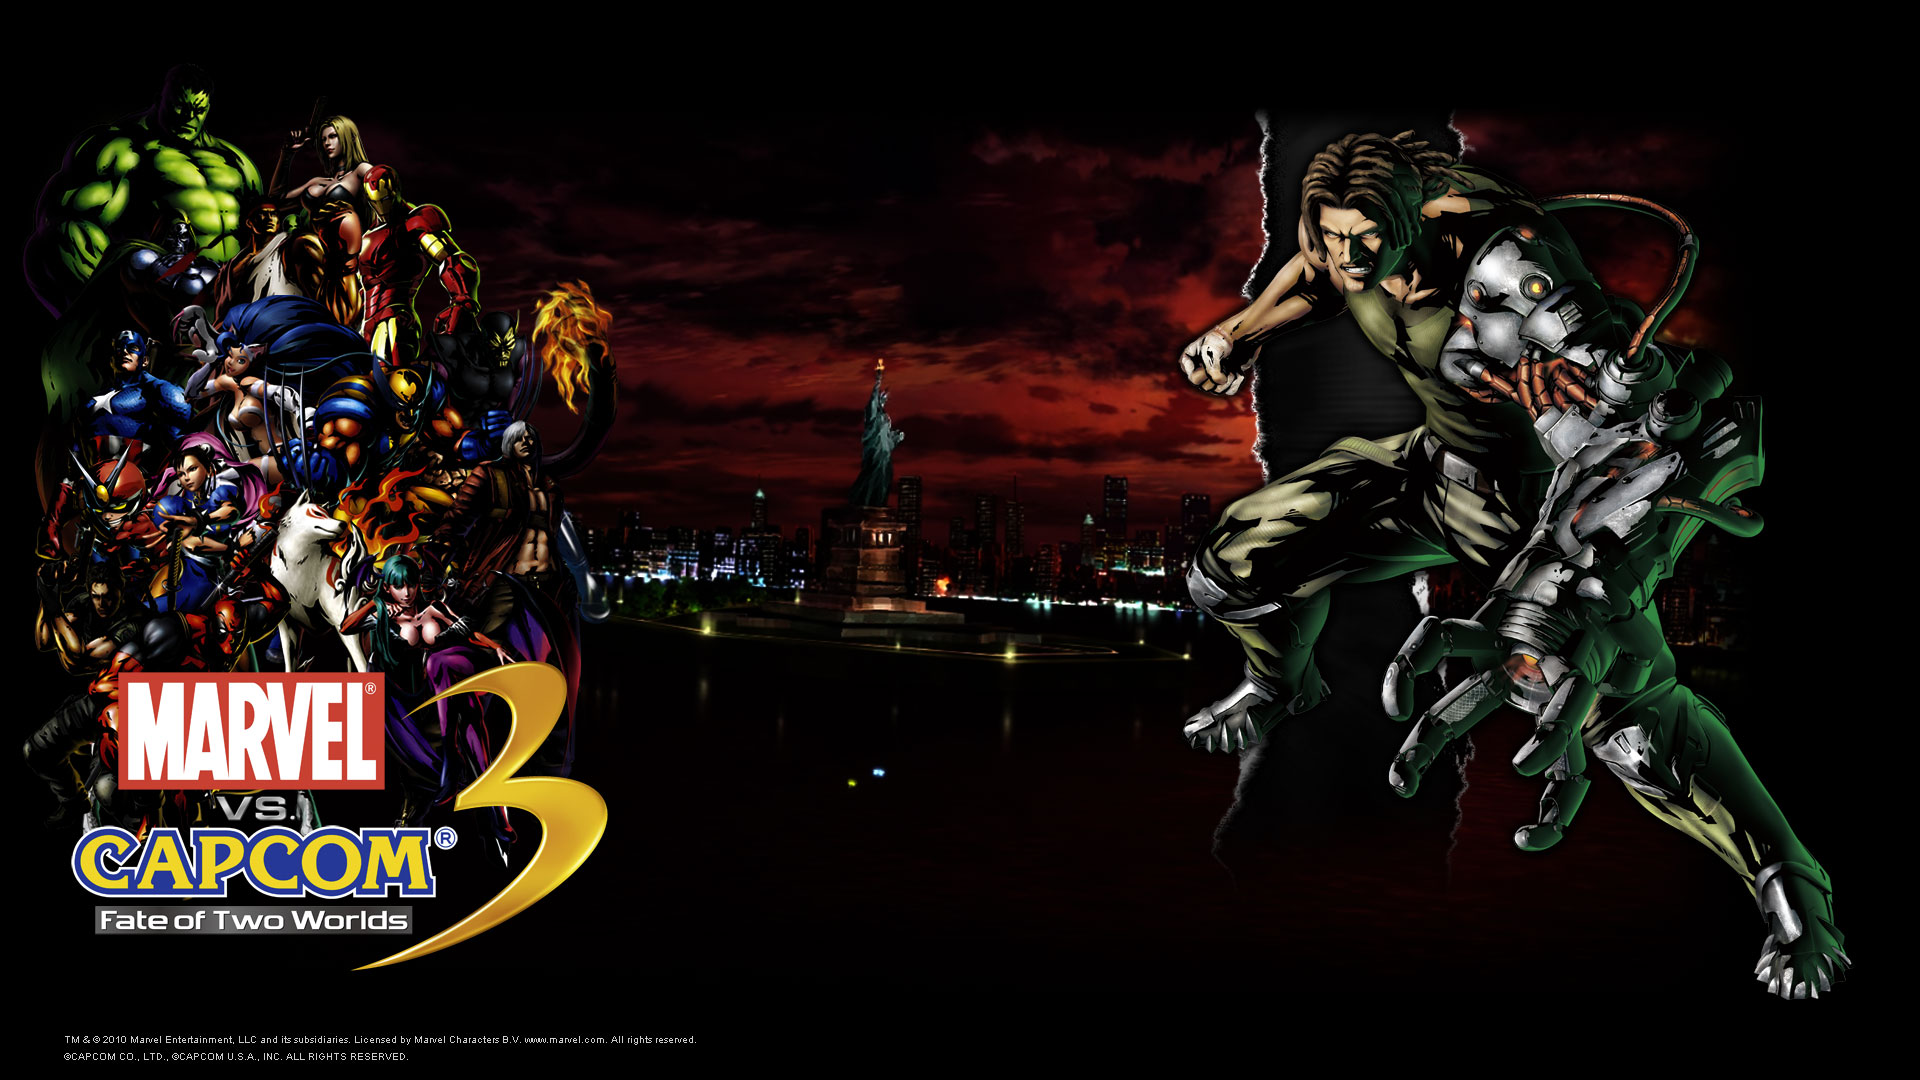 Video Game Marvel vs. Capcom 3: Fate of Two Worlds HD Wallpaper | Background Image